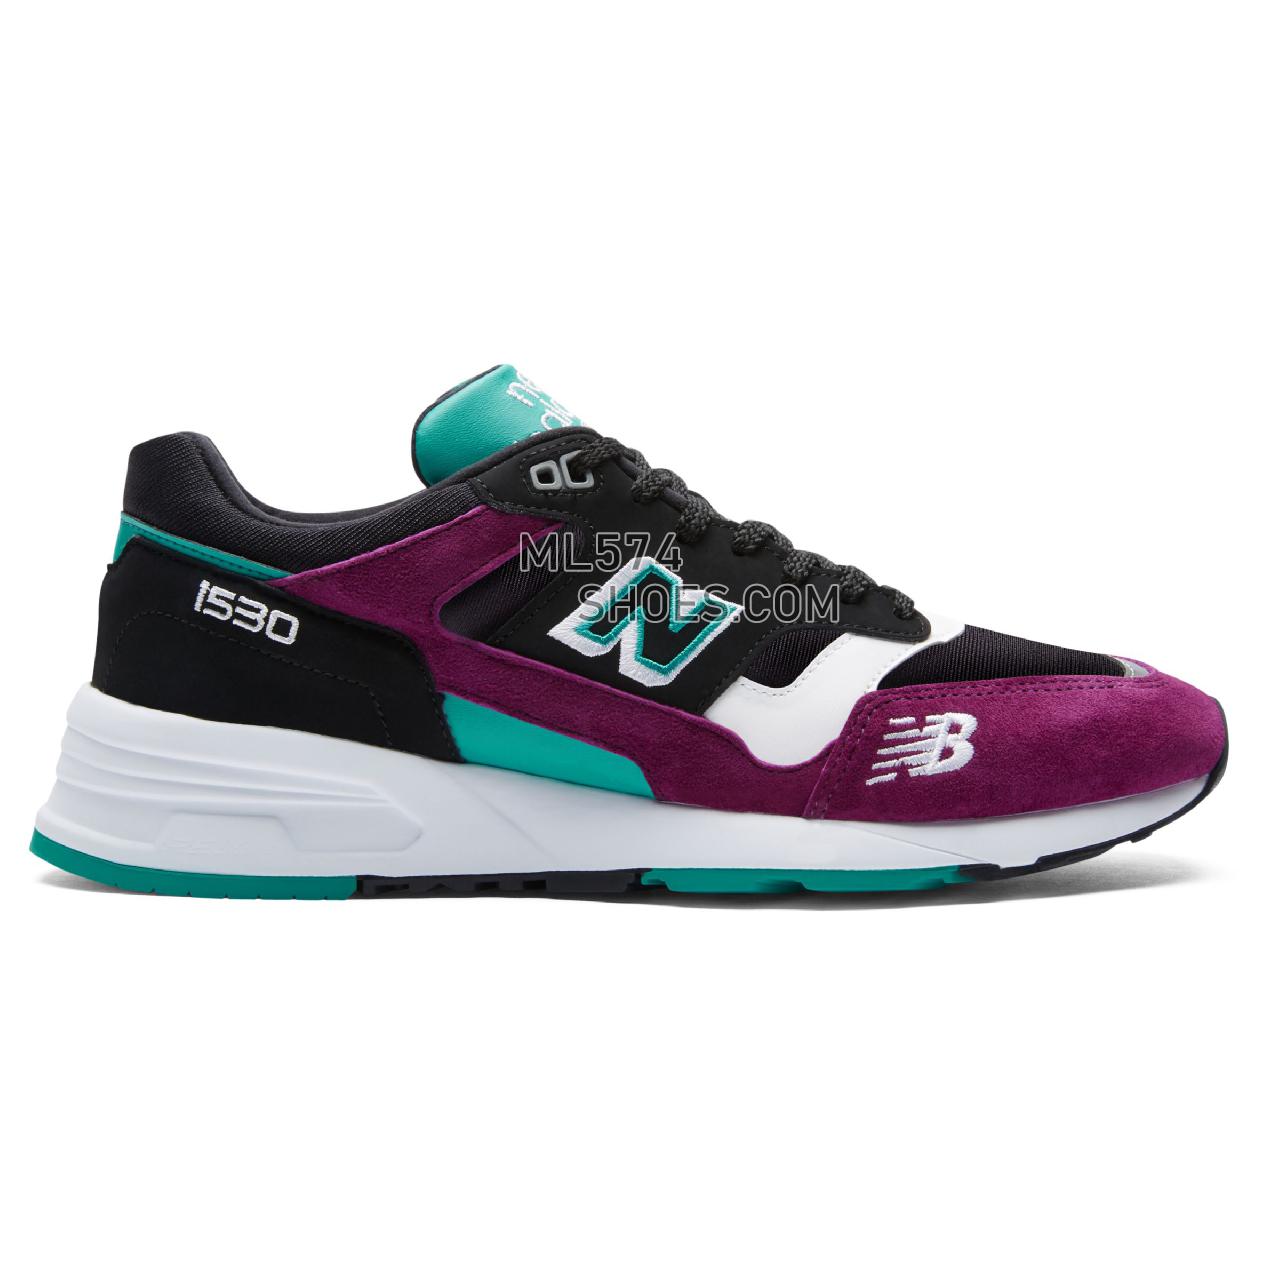 New Balance Made in UK 1530 - Men's 1530 Made in UK Classic M1530-P - Black with Purple and Teal - M1530KPT